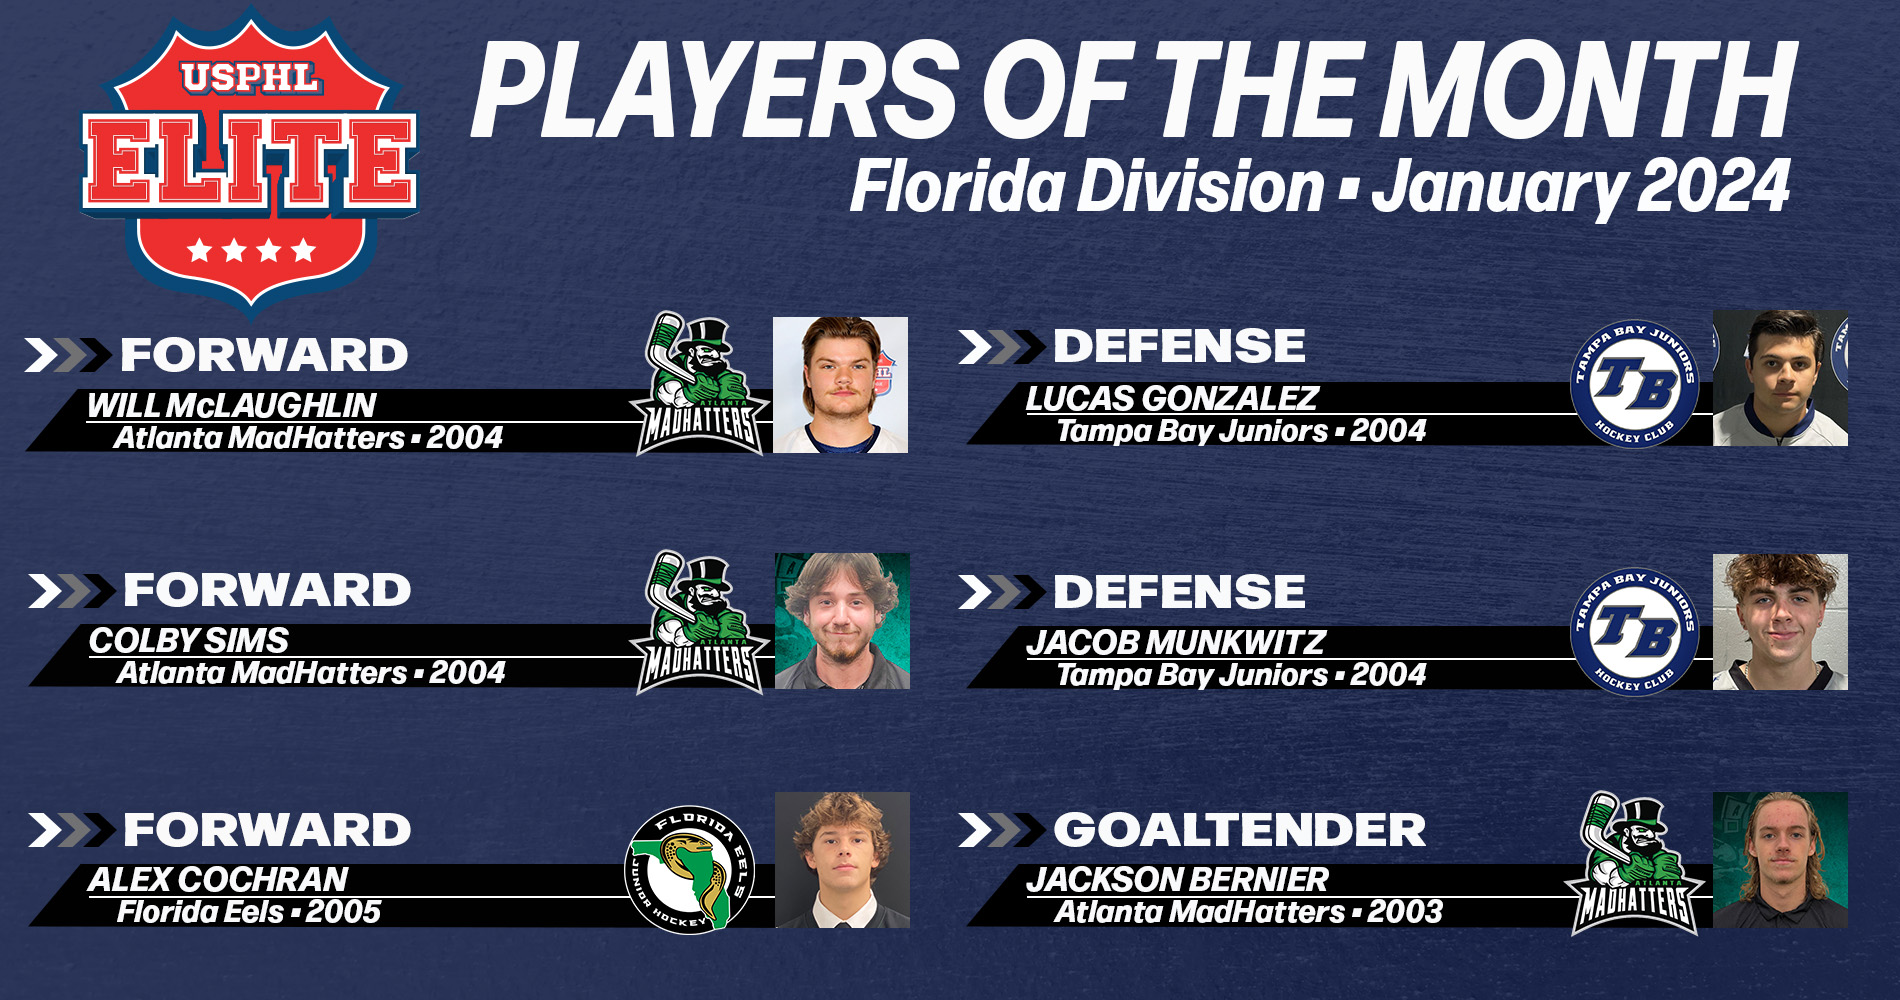 USPHL Elite 2023-24 Florida Division Players Of The Month: January 2024